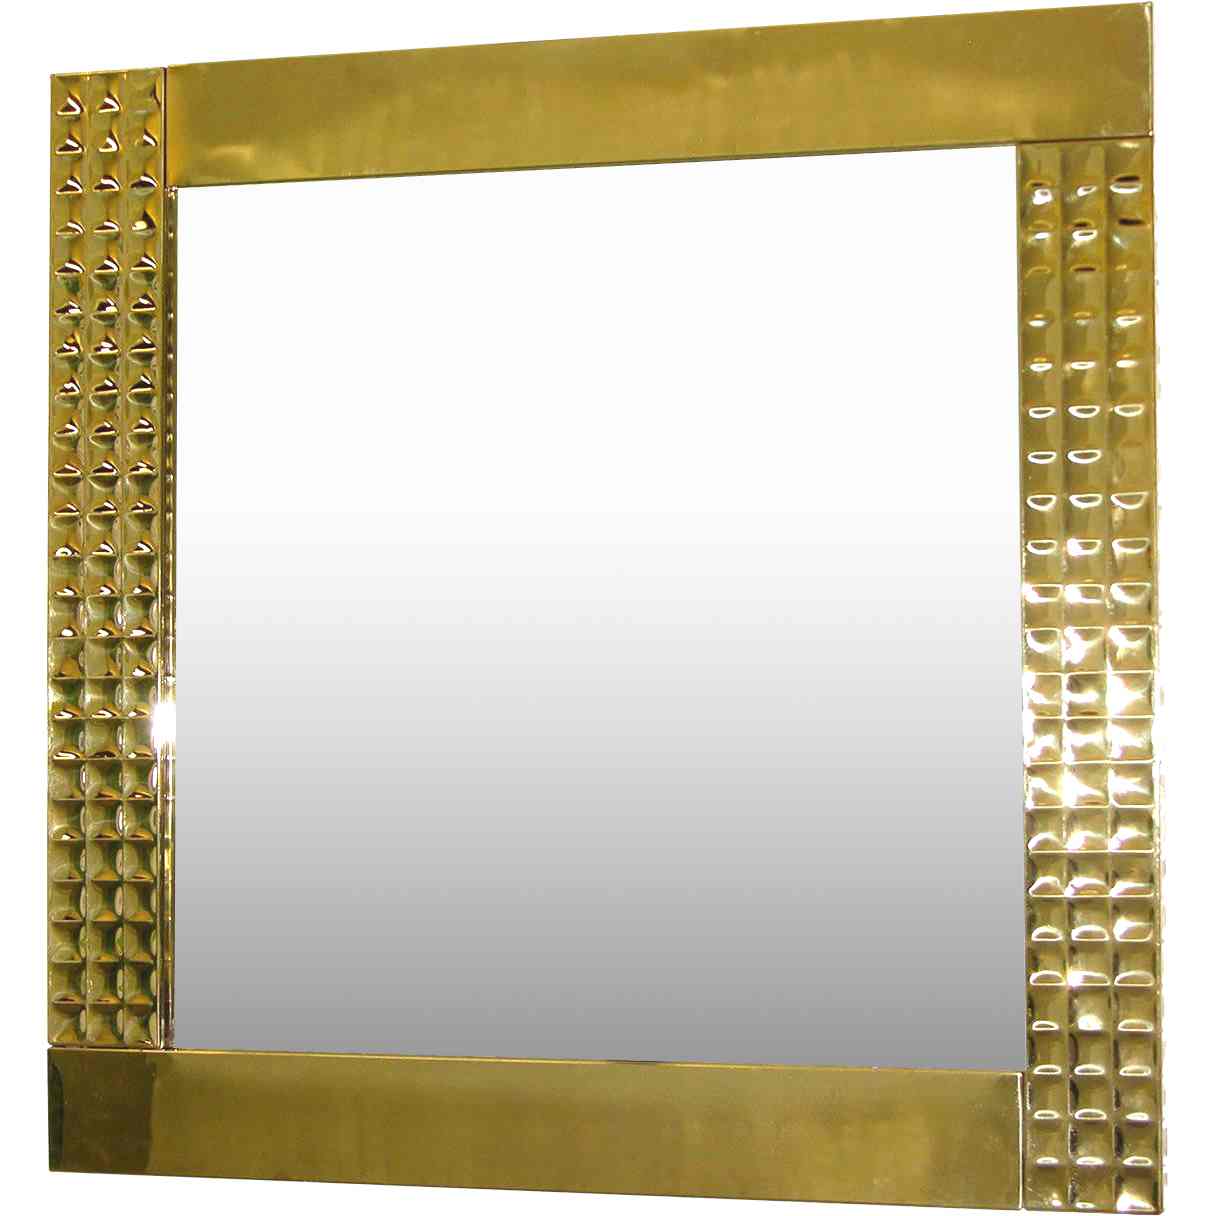 Italian 1970s Vintage Brass Square Mirror with Modern Gold Jewel-Like Detail - Cosulich Interiors & Antiques